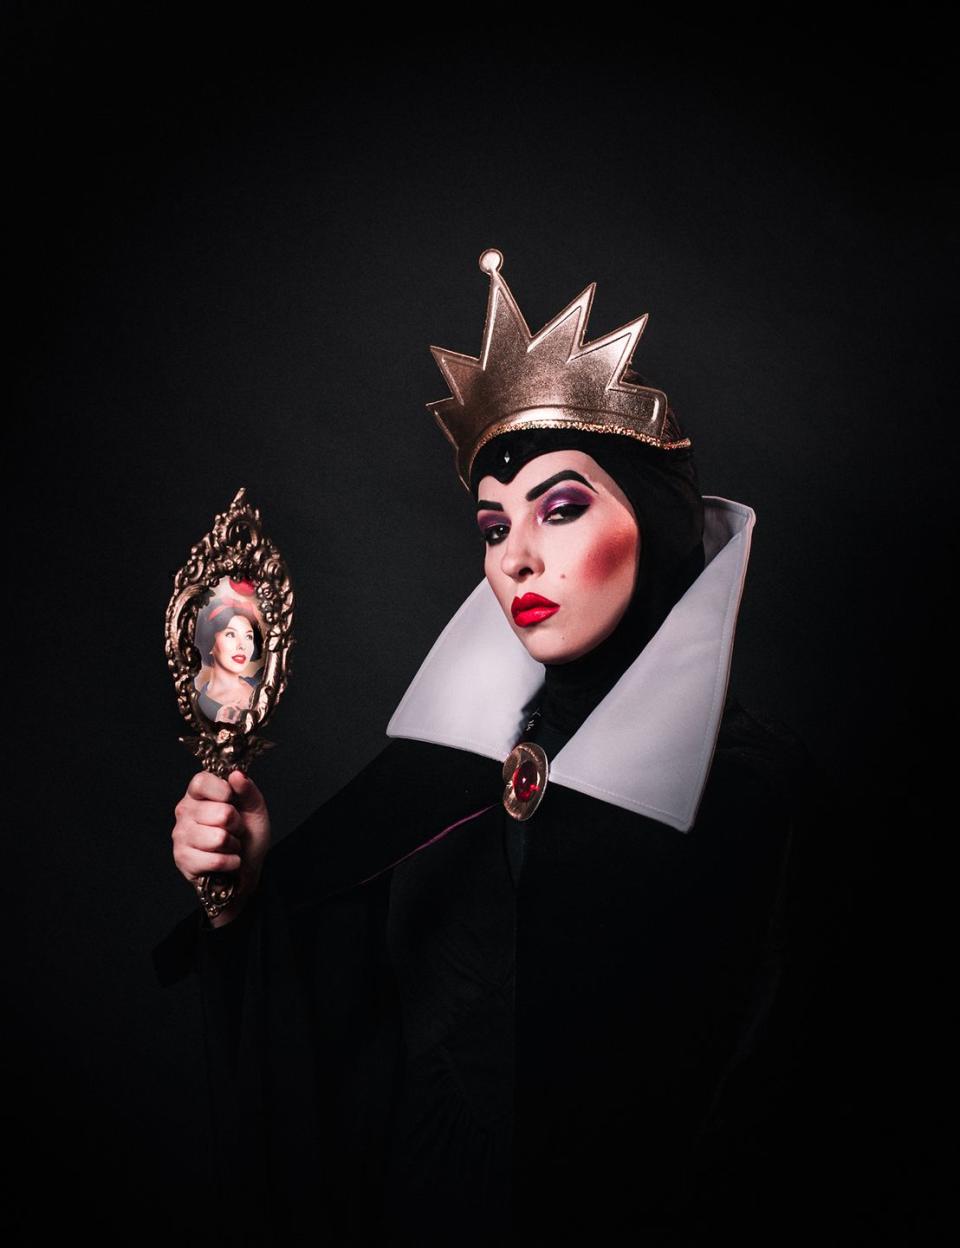 8) DIY The Evil Queen from Snow White